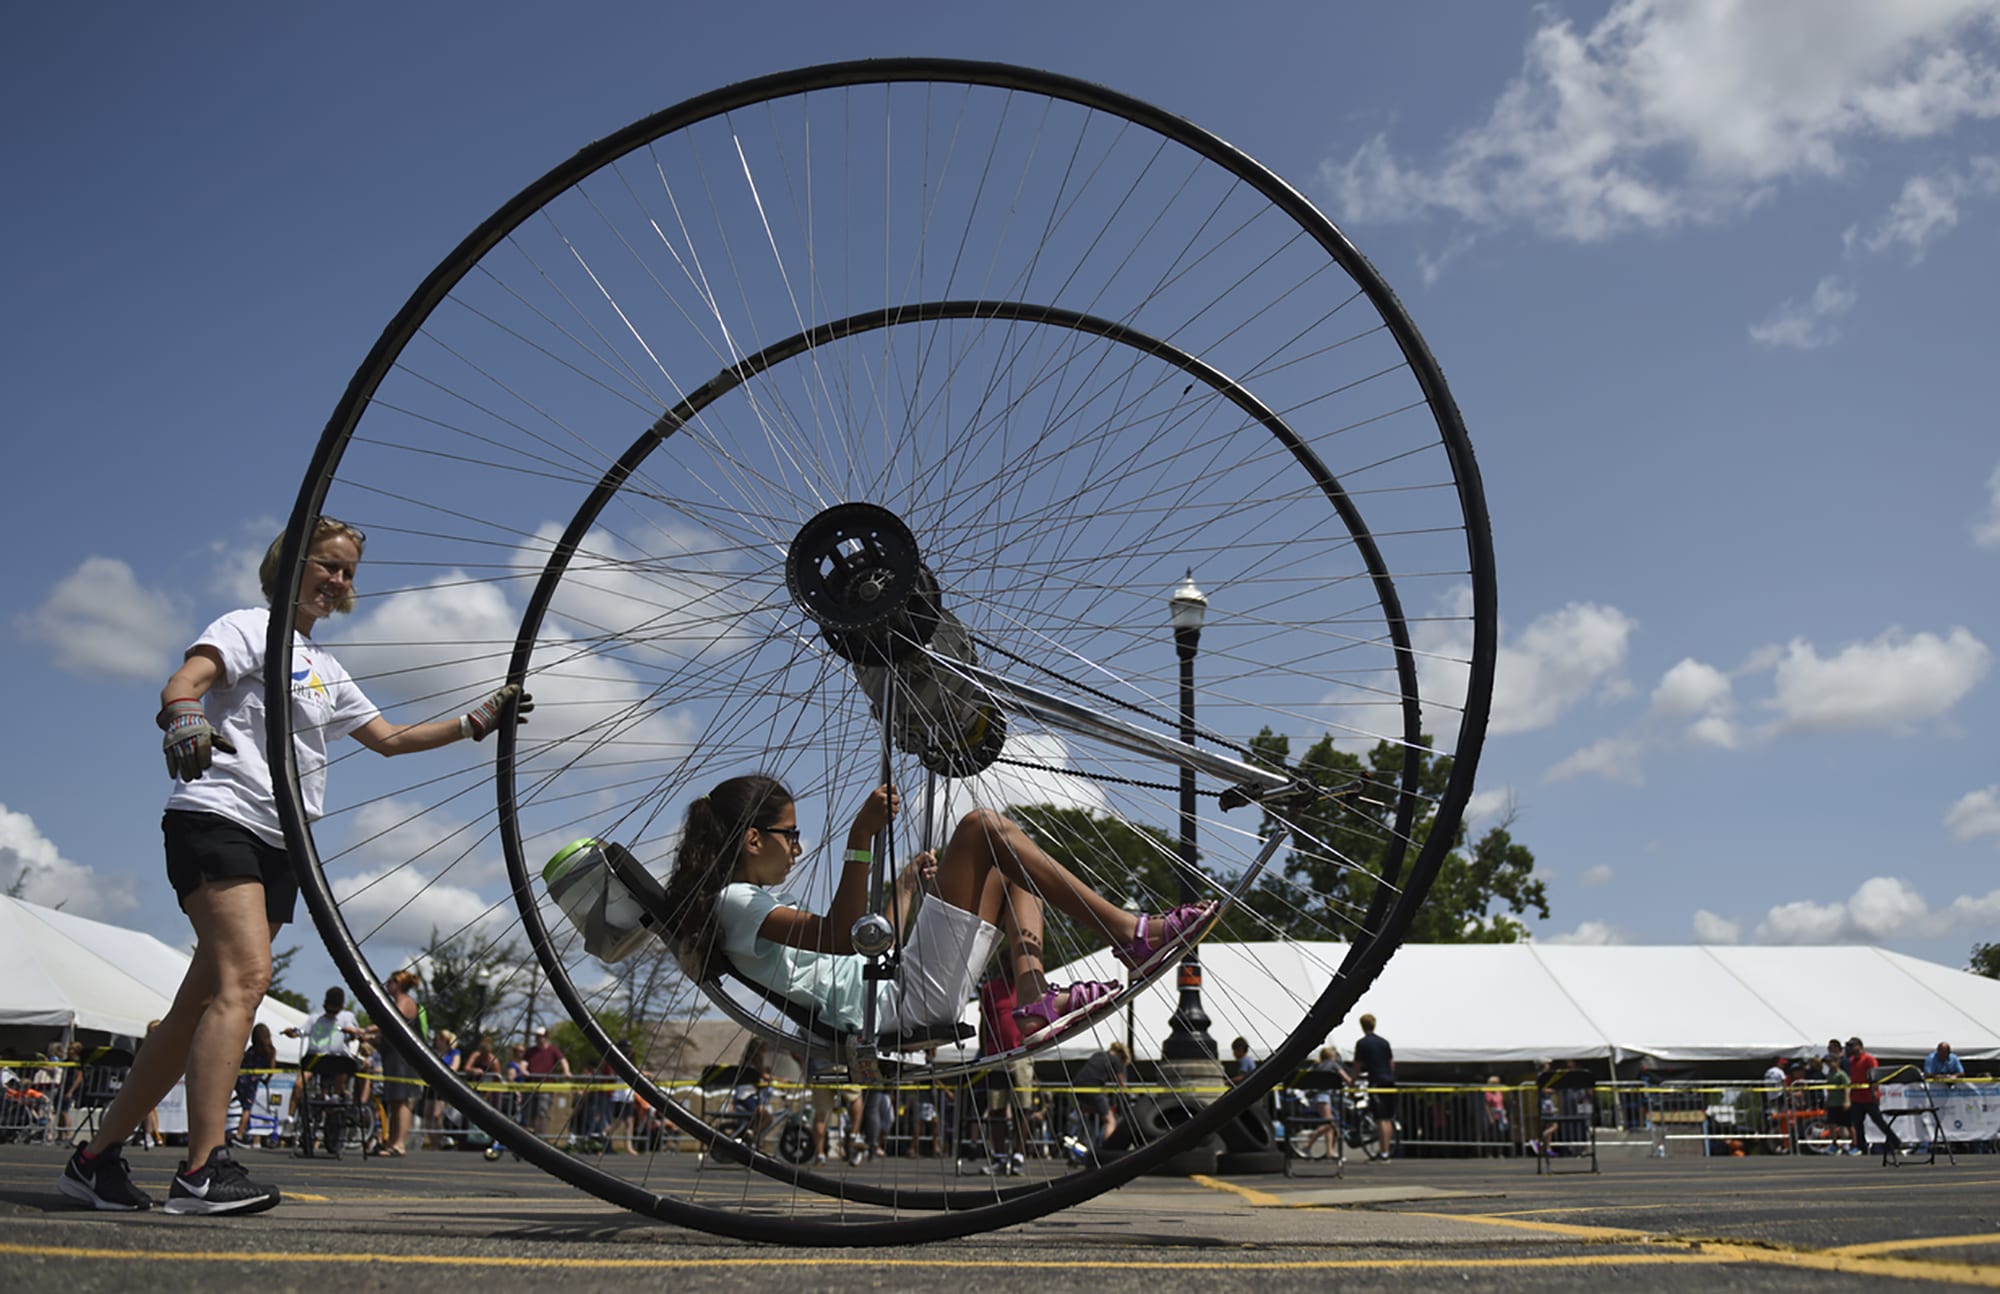 What the Maker Faire’s hackers and hula hoopers can teach us about